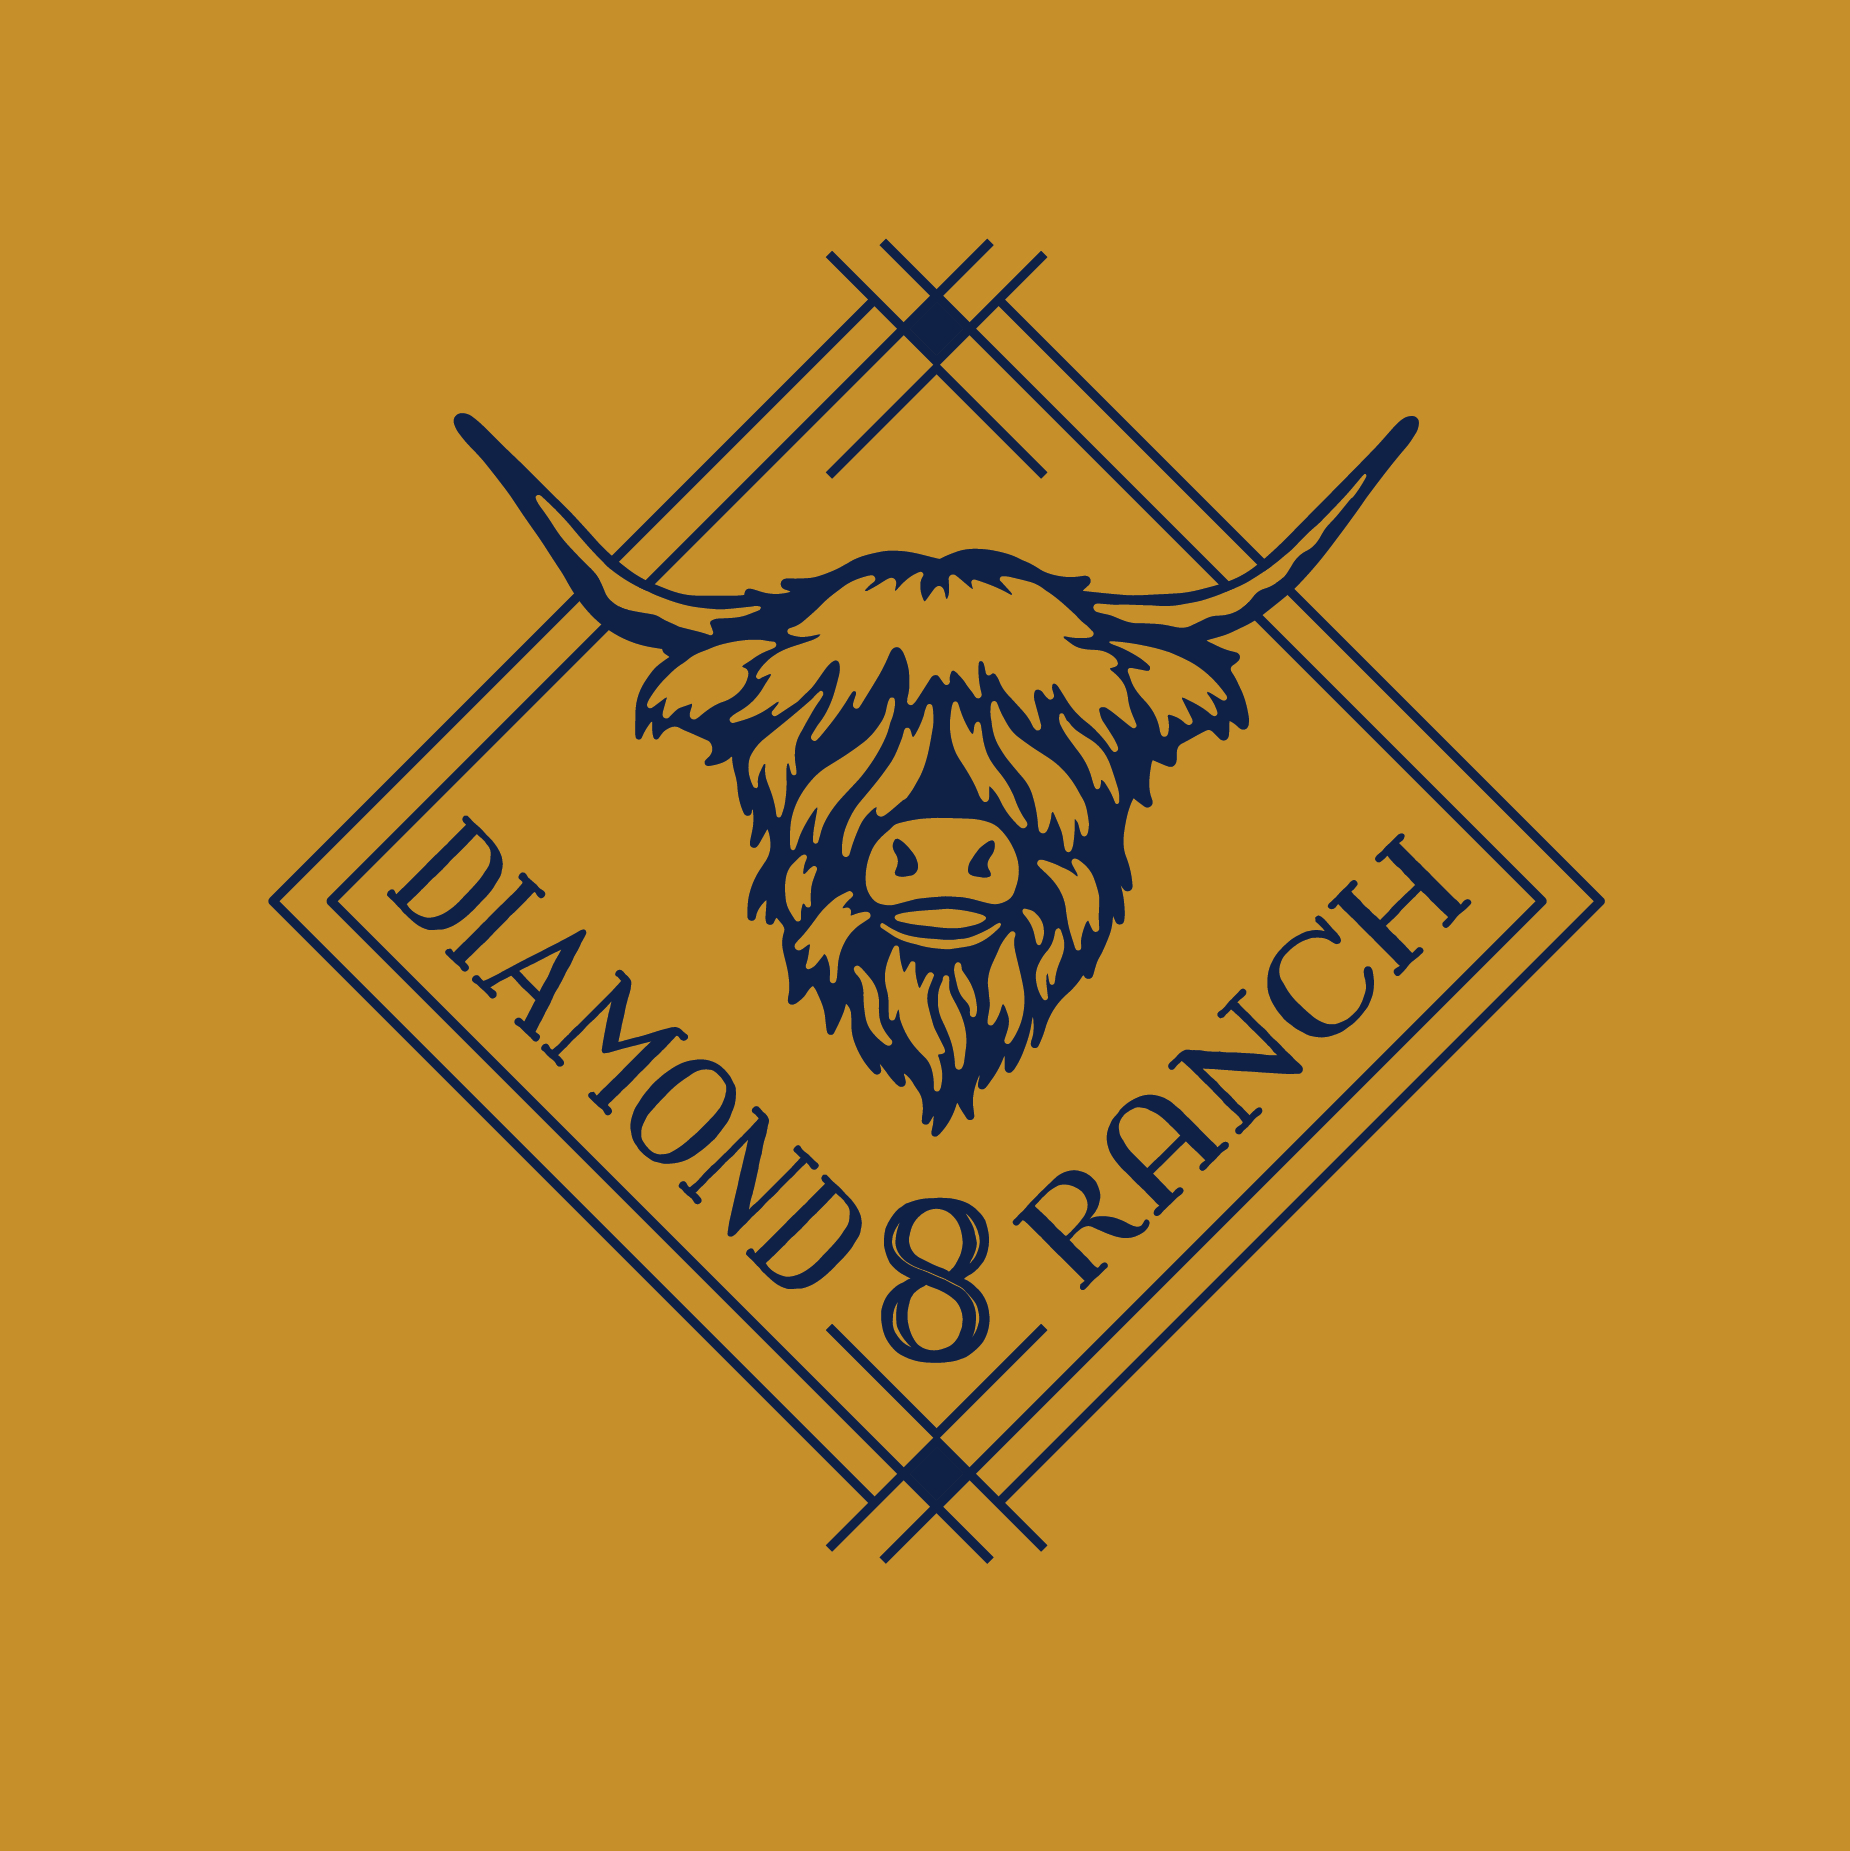 logo and branding for highland cow ranch in wyoming